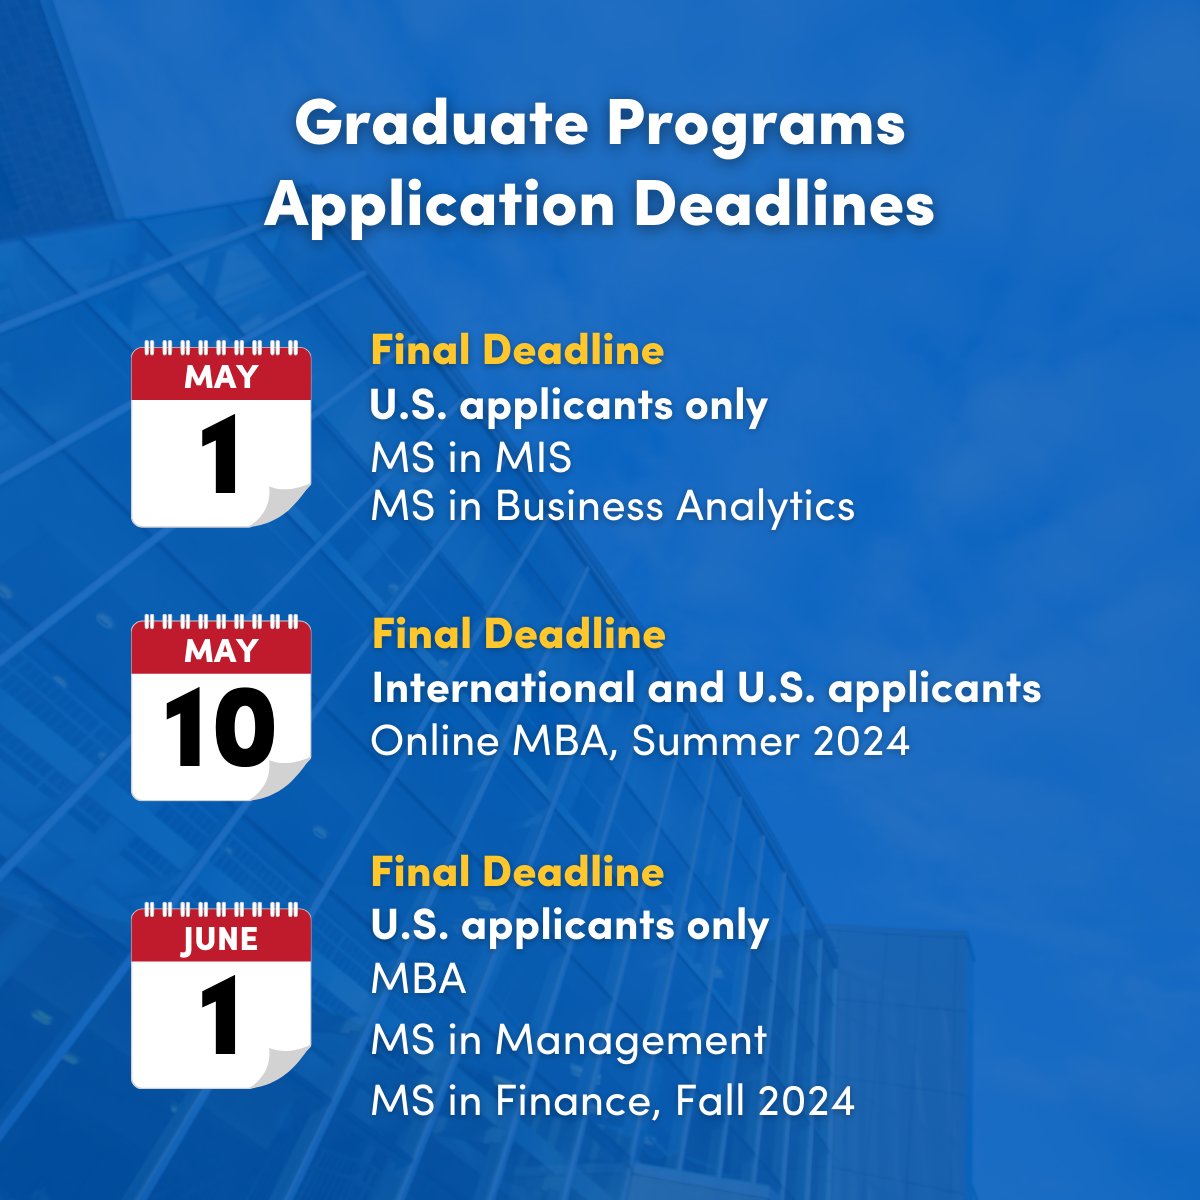 Mark your calendars! Start your application process today - ms.spr.ly/6012crp1K.
#UBMgt #AdmissionsDeadlines #GradSchool